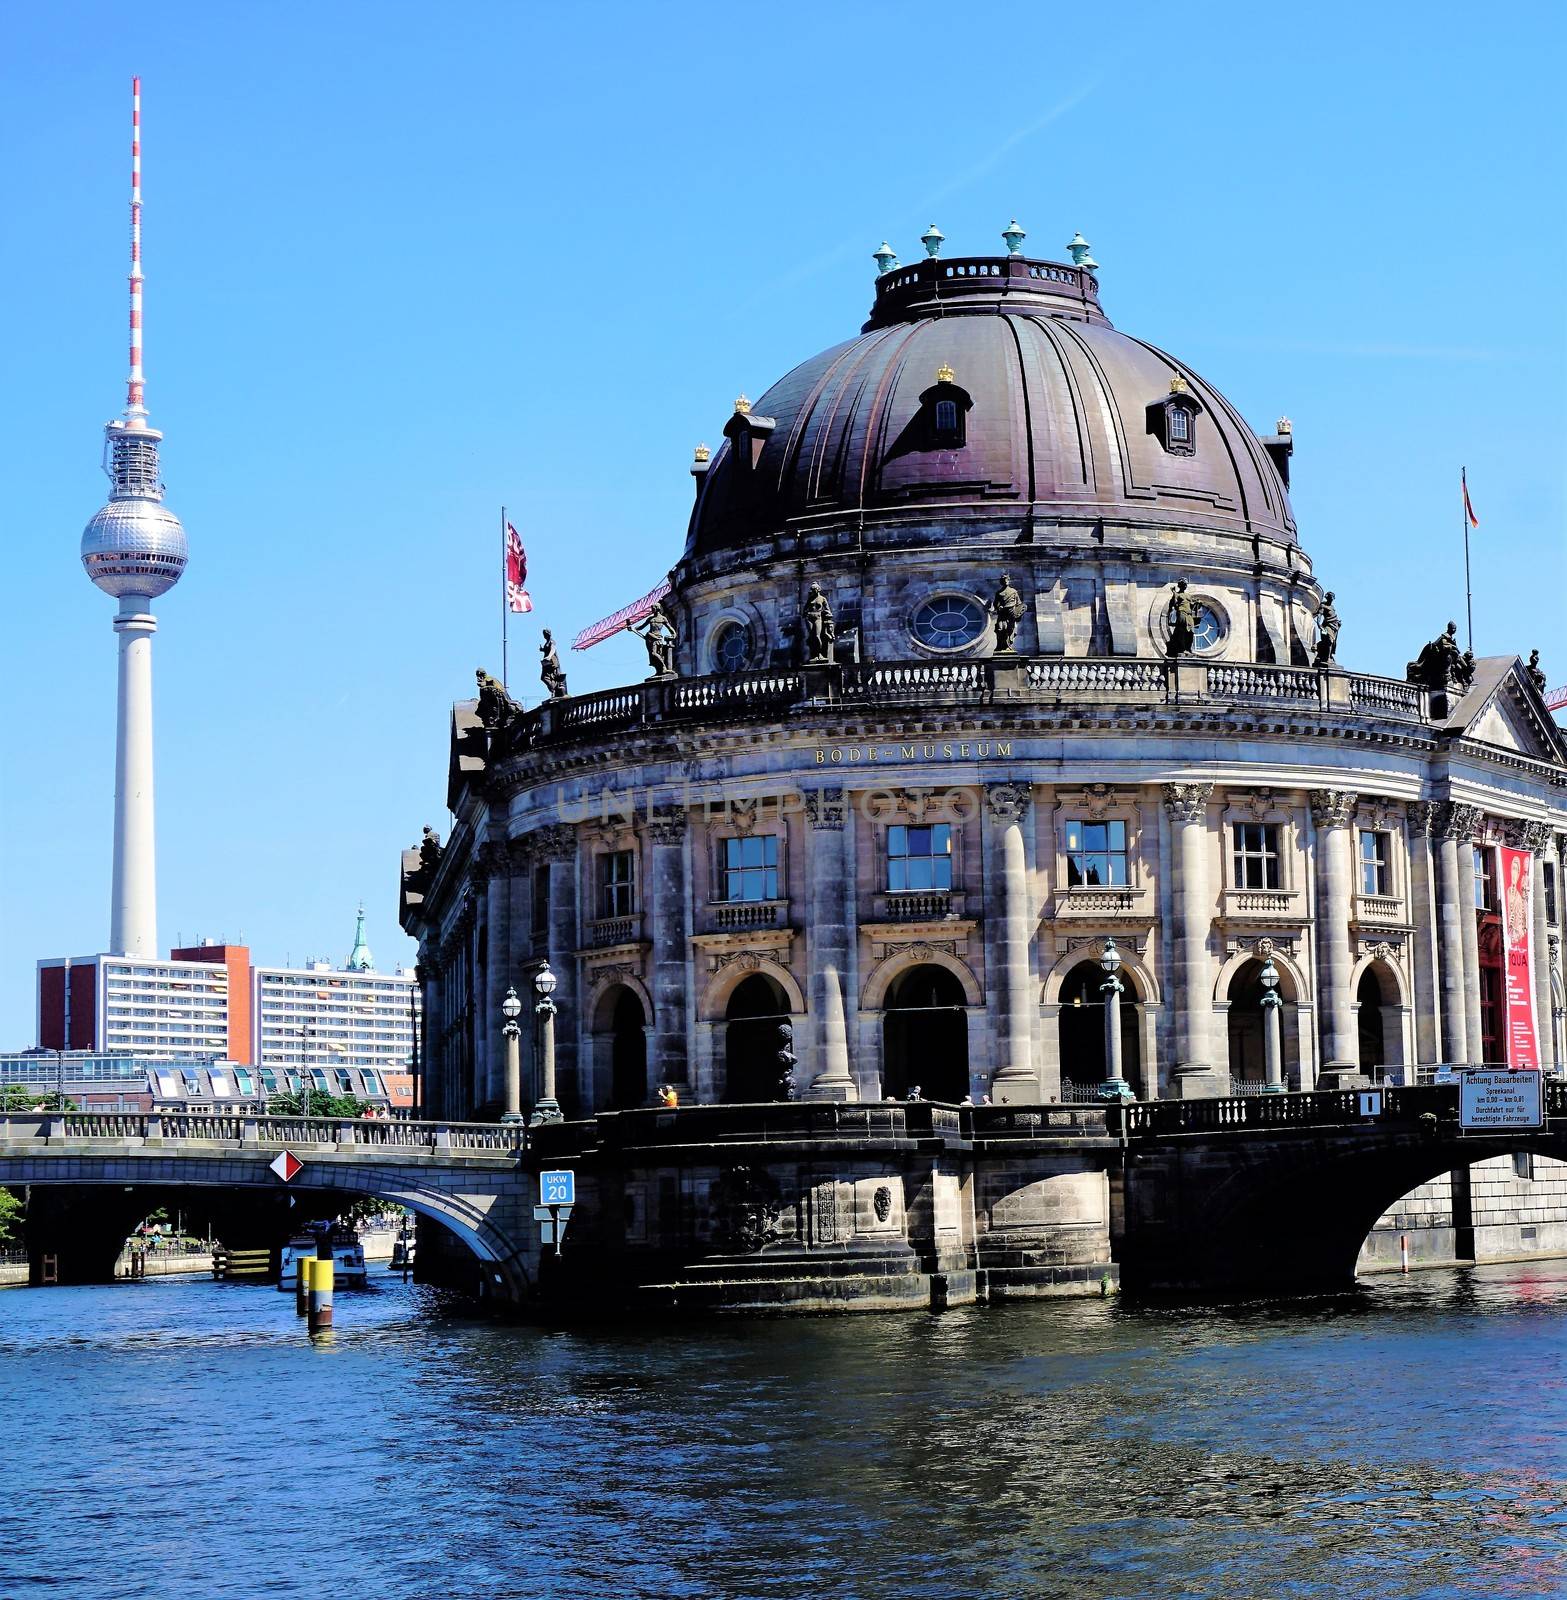 Berlin tv tower and Bode museum by pisces2386